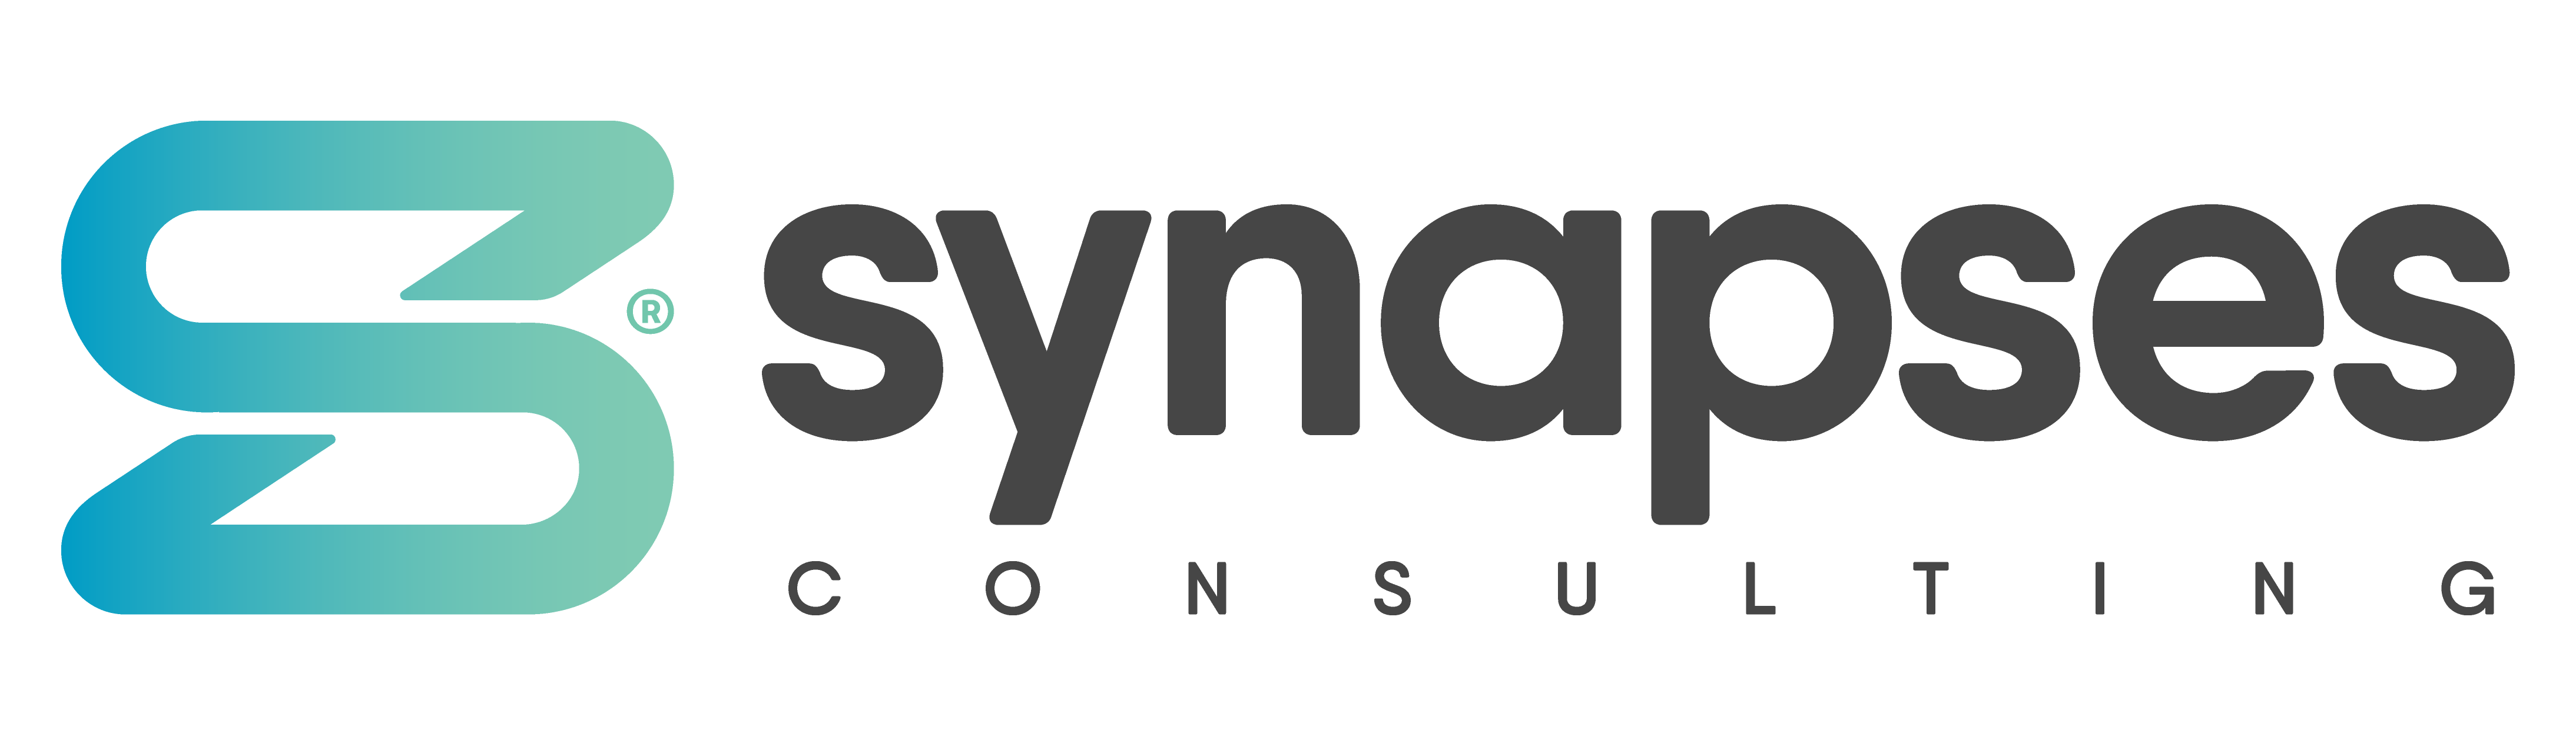 Synapses Consulting - Logo